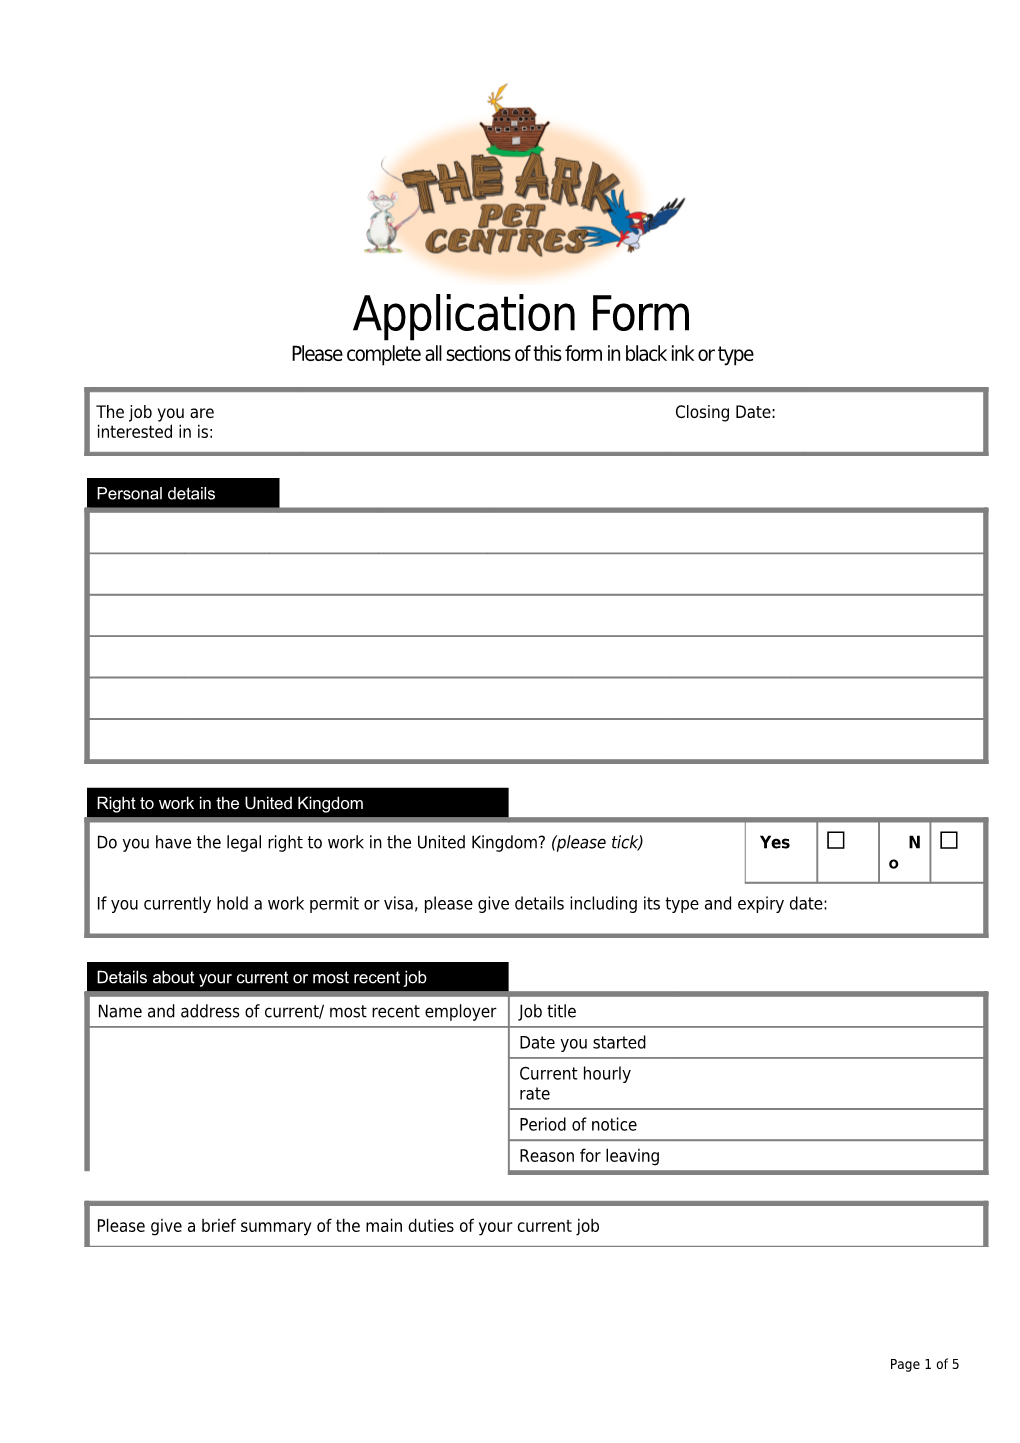 Please Complete All Sections of This Form in Black Ink Or Type